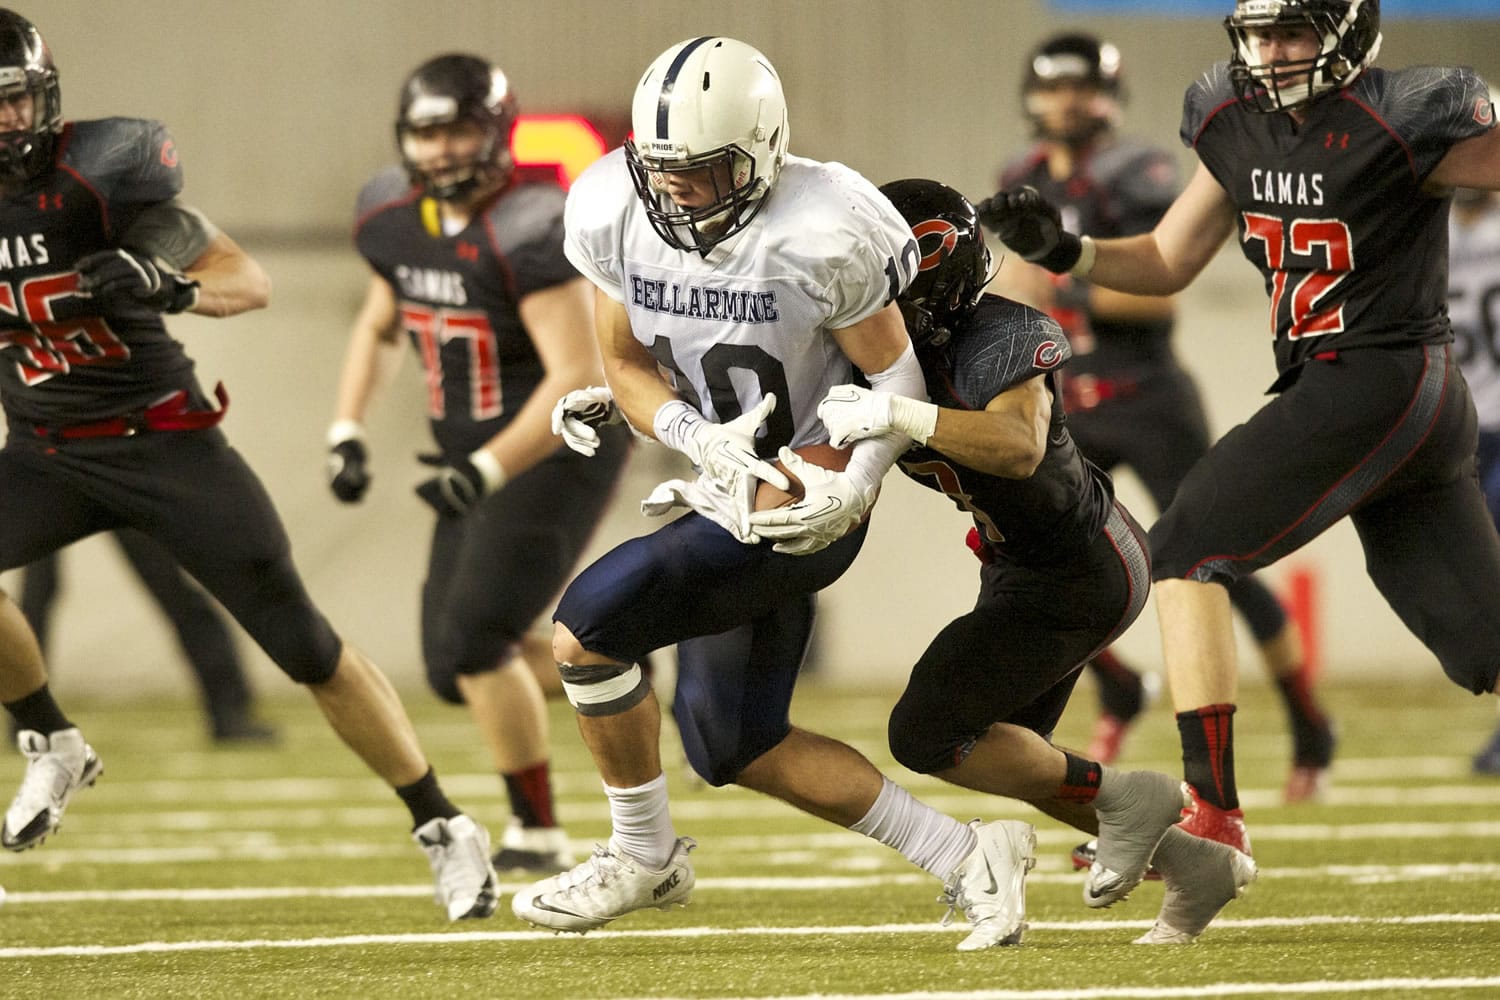 Camas beat Bellarmine Prep 49-21 in the 4A state semifinal game in Tacoma.